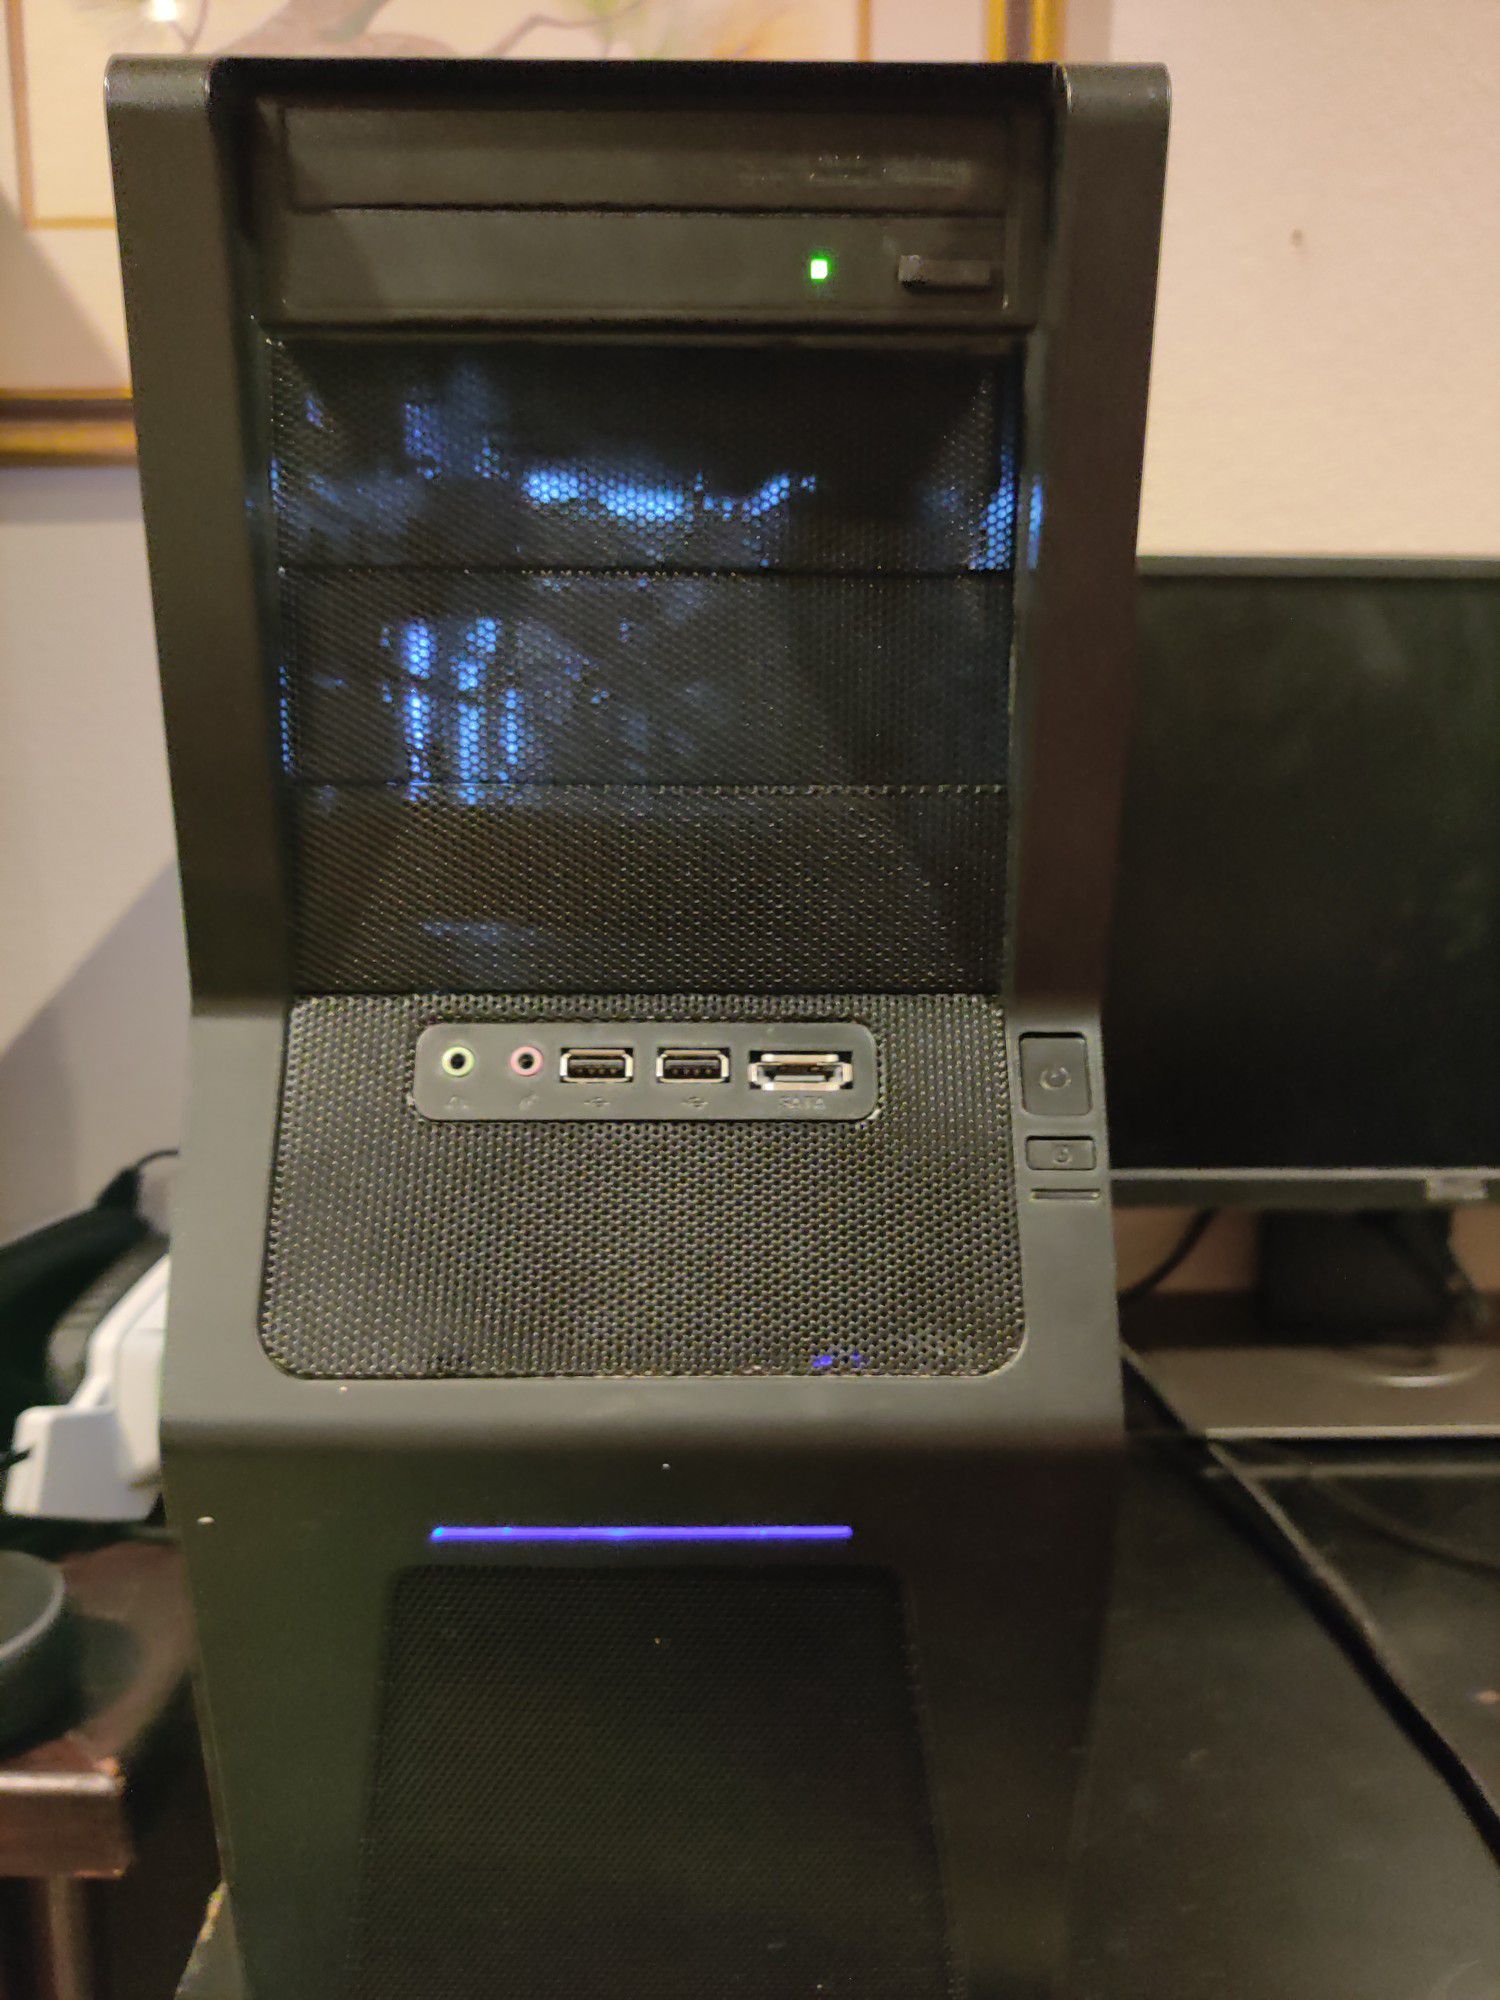 Gaming Computer for sale or trade